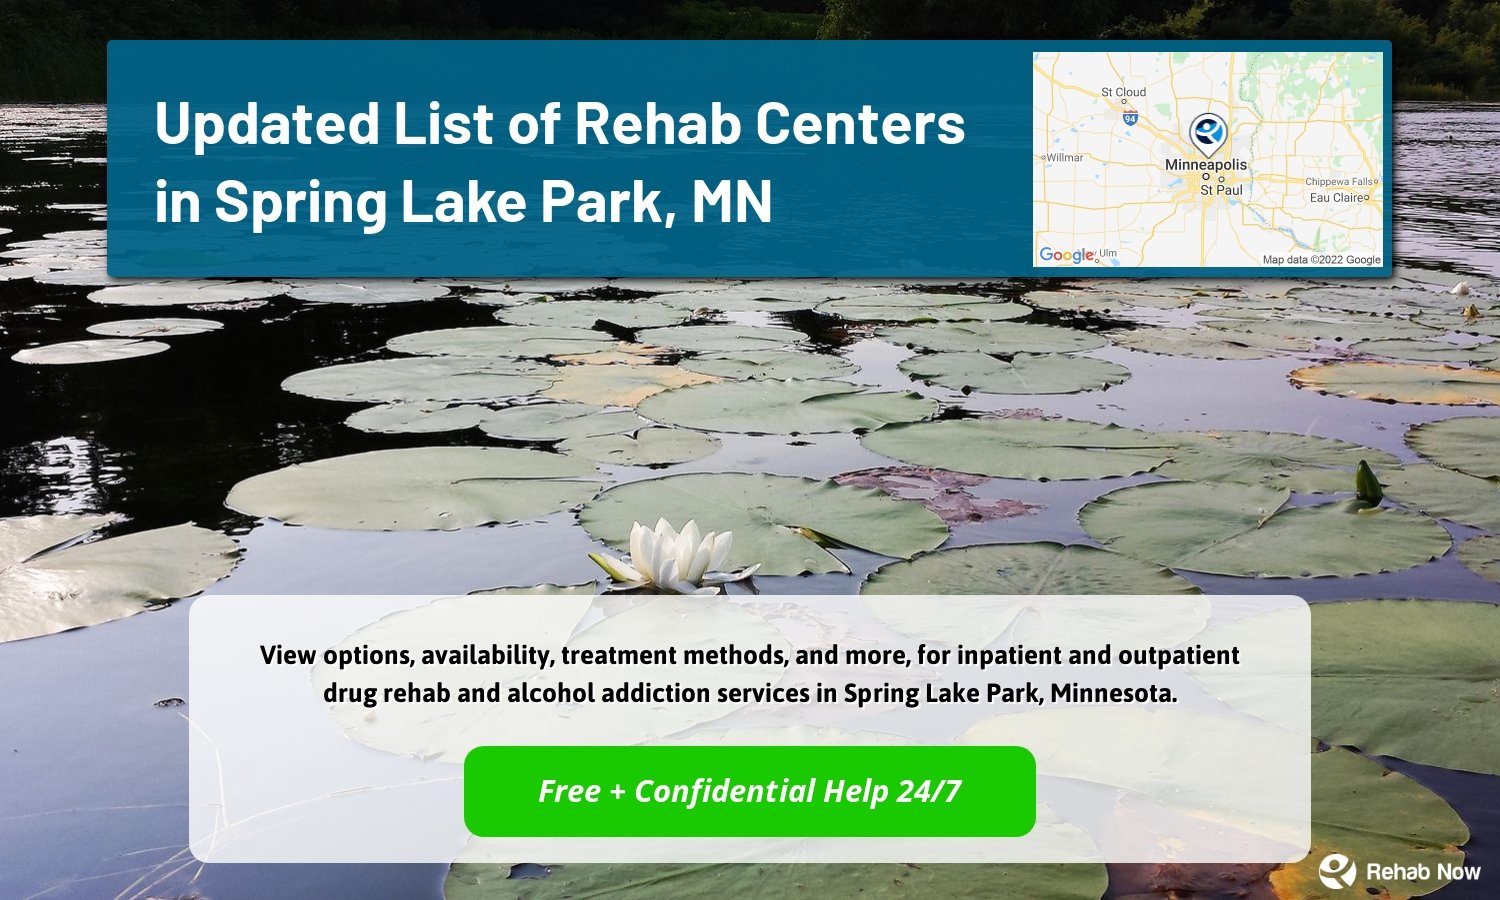 View options, availability, treatment methods, and more, for inpatient and outpatient drug rehab and alcohol addiction services in Spring Lake Park, Minnesota.